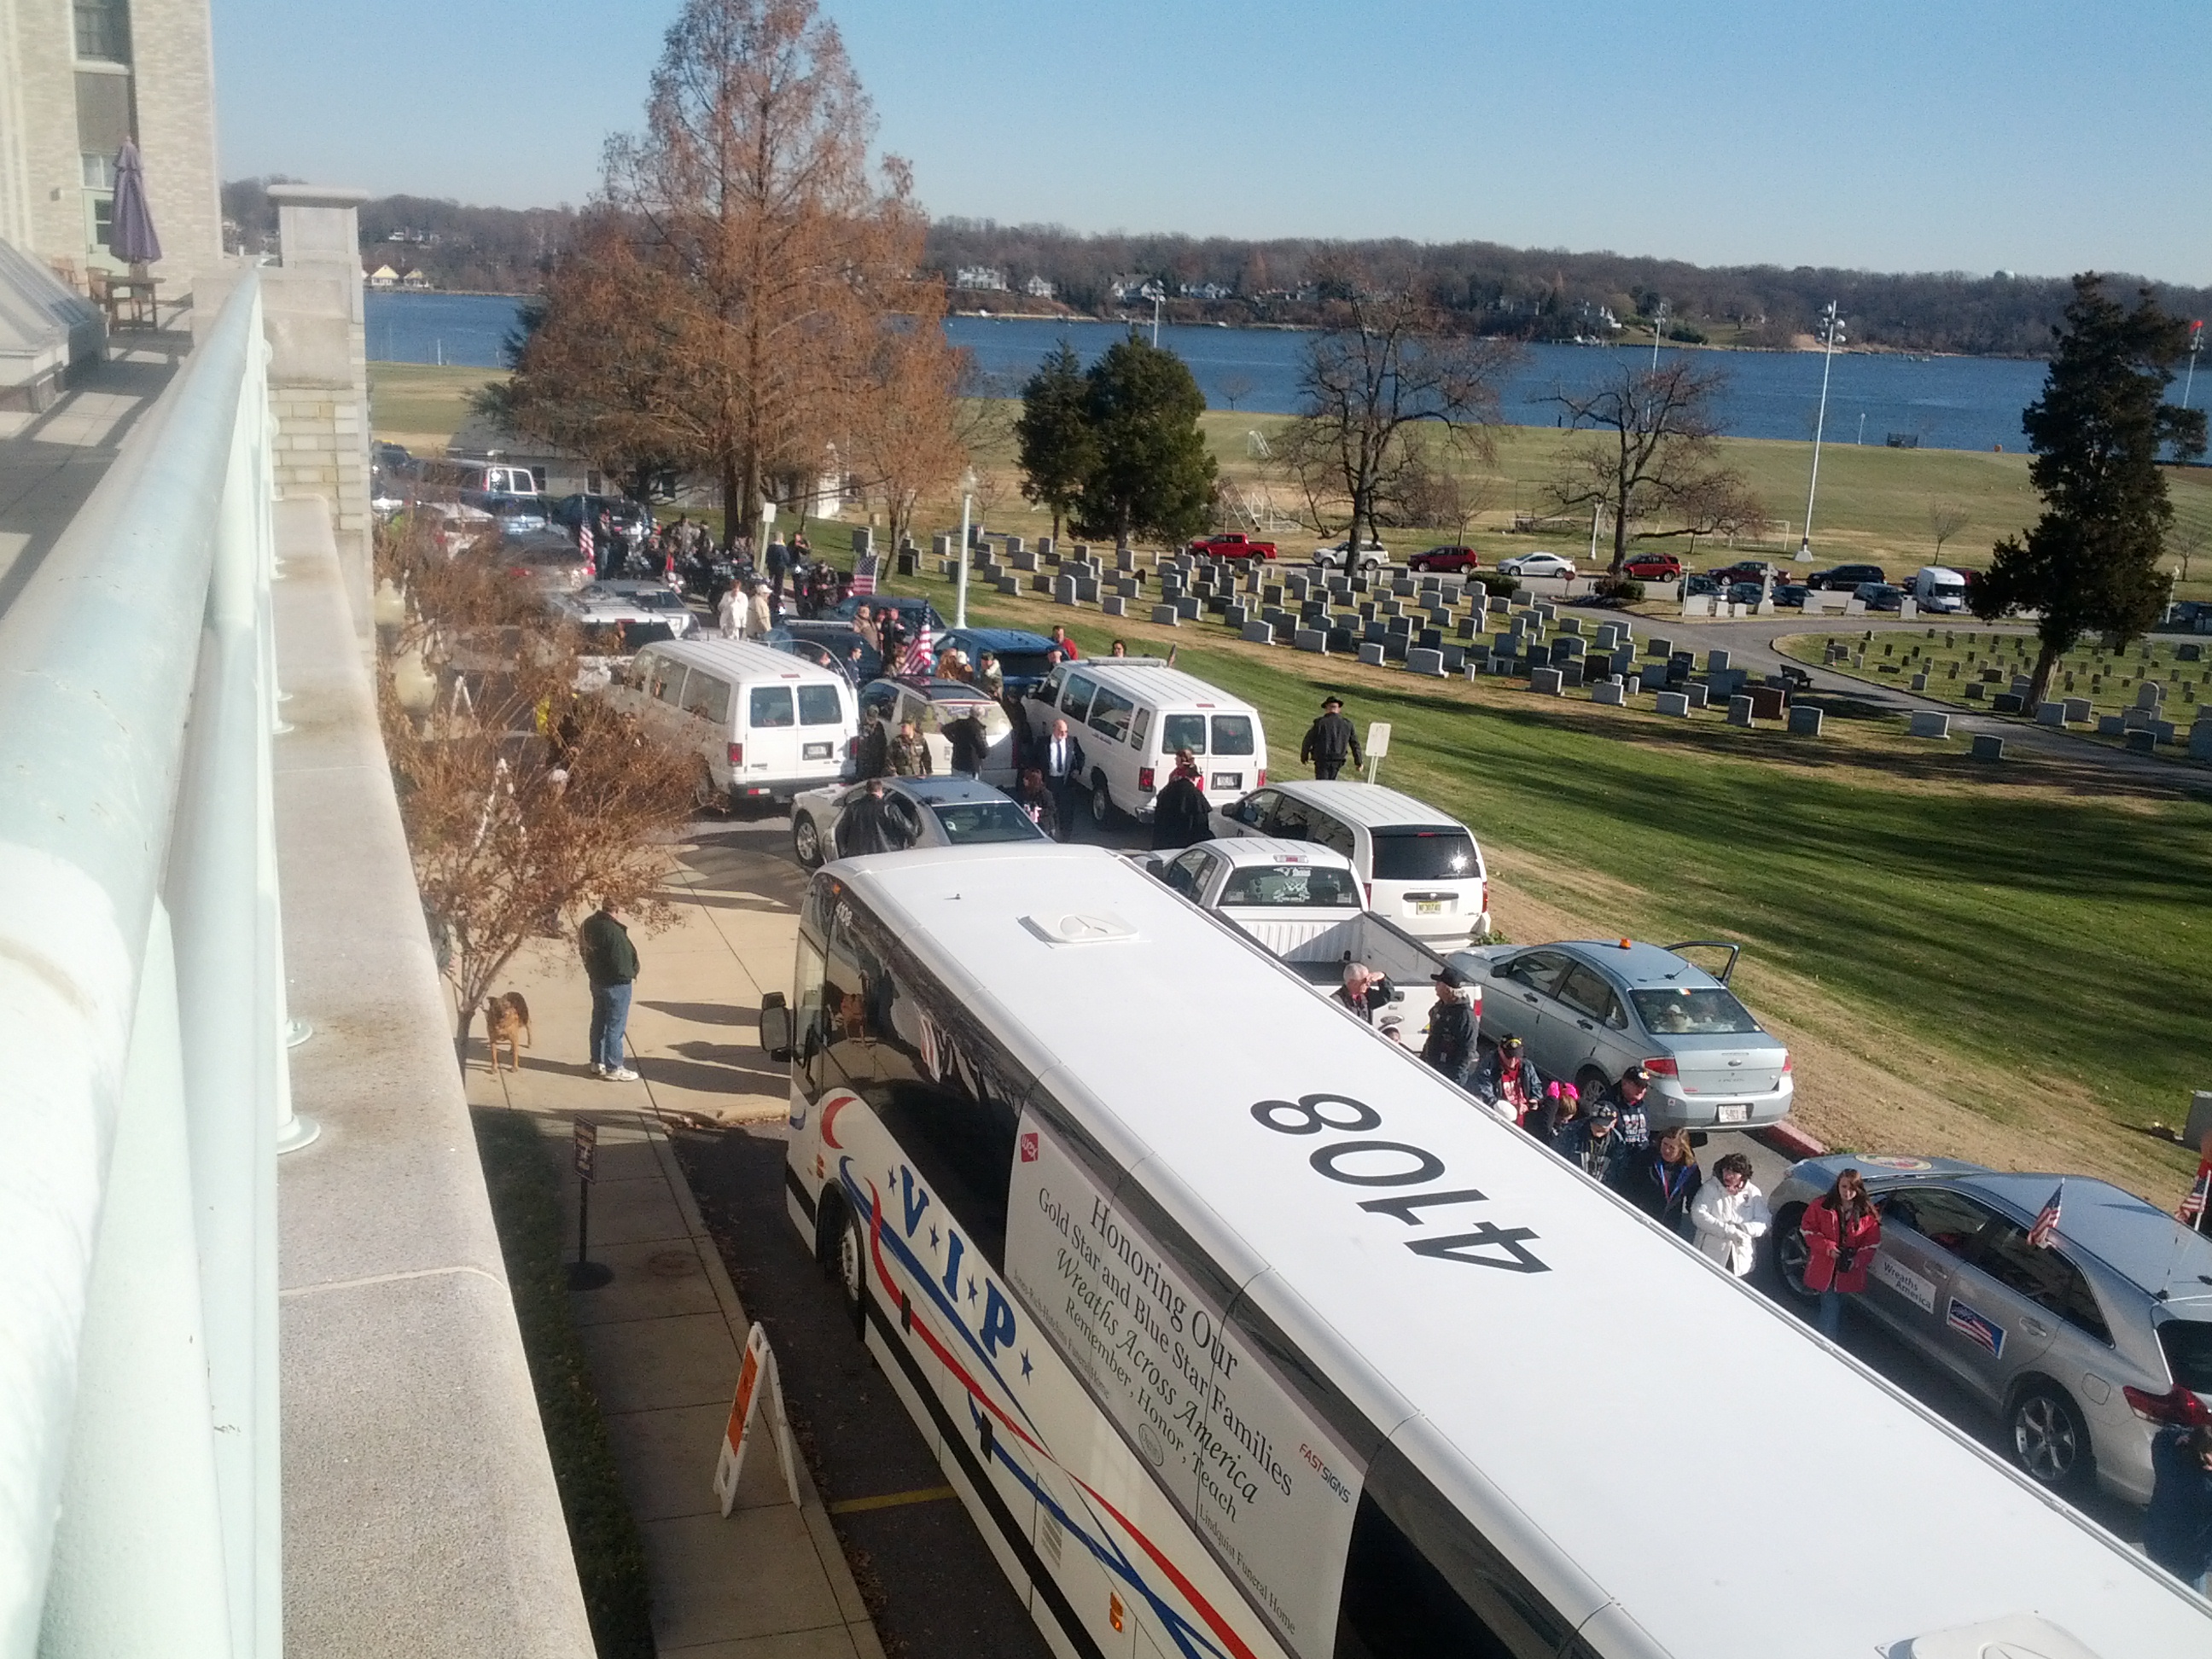 The procession of vehicles for Wreaths Across America, including motorcycles and vehicles from various police departments in Maine (where the program got its start).